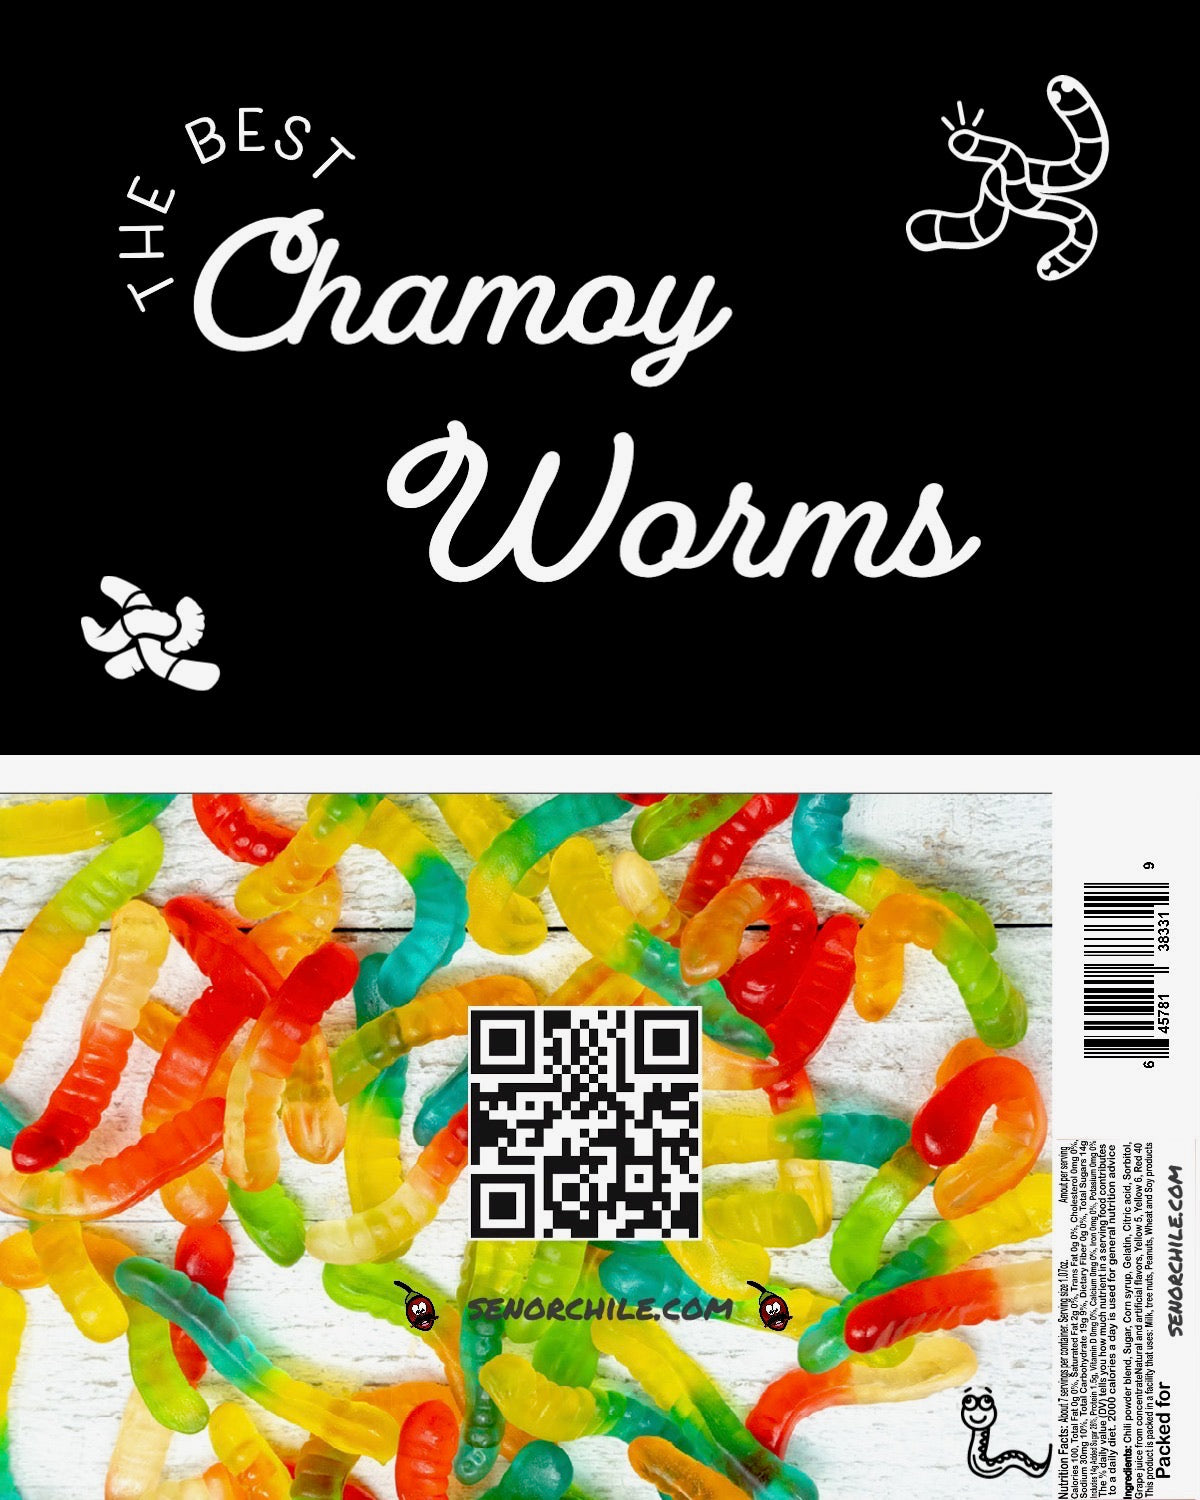 The Best Chamoy Worms